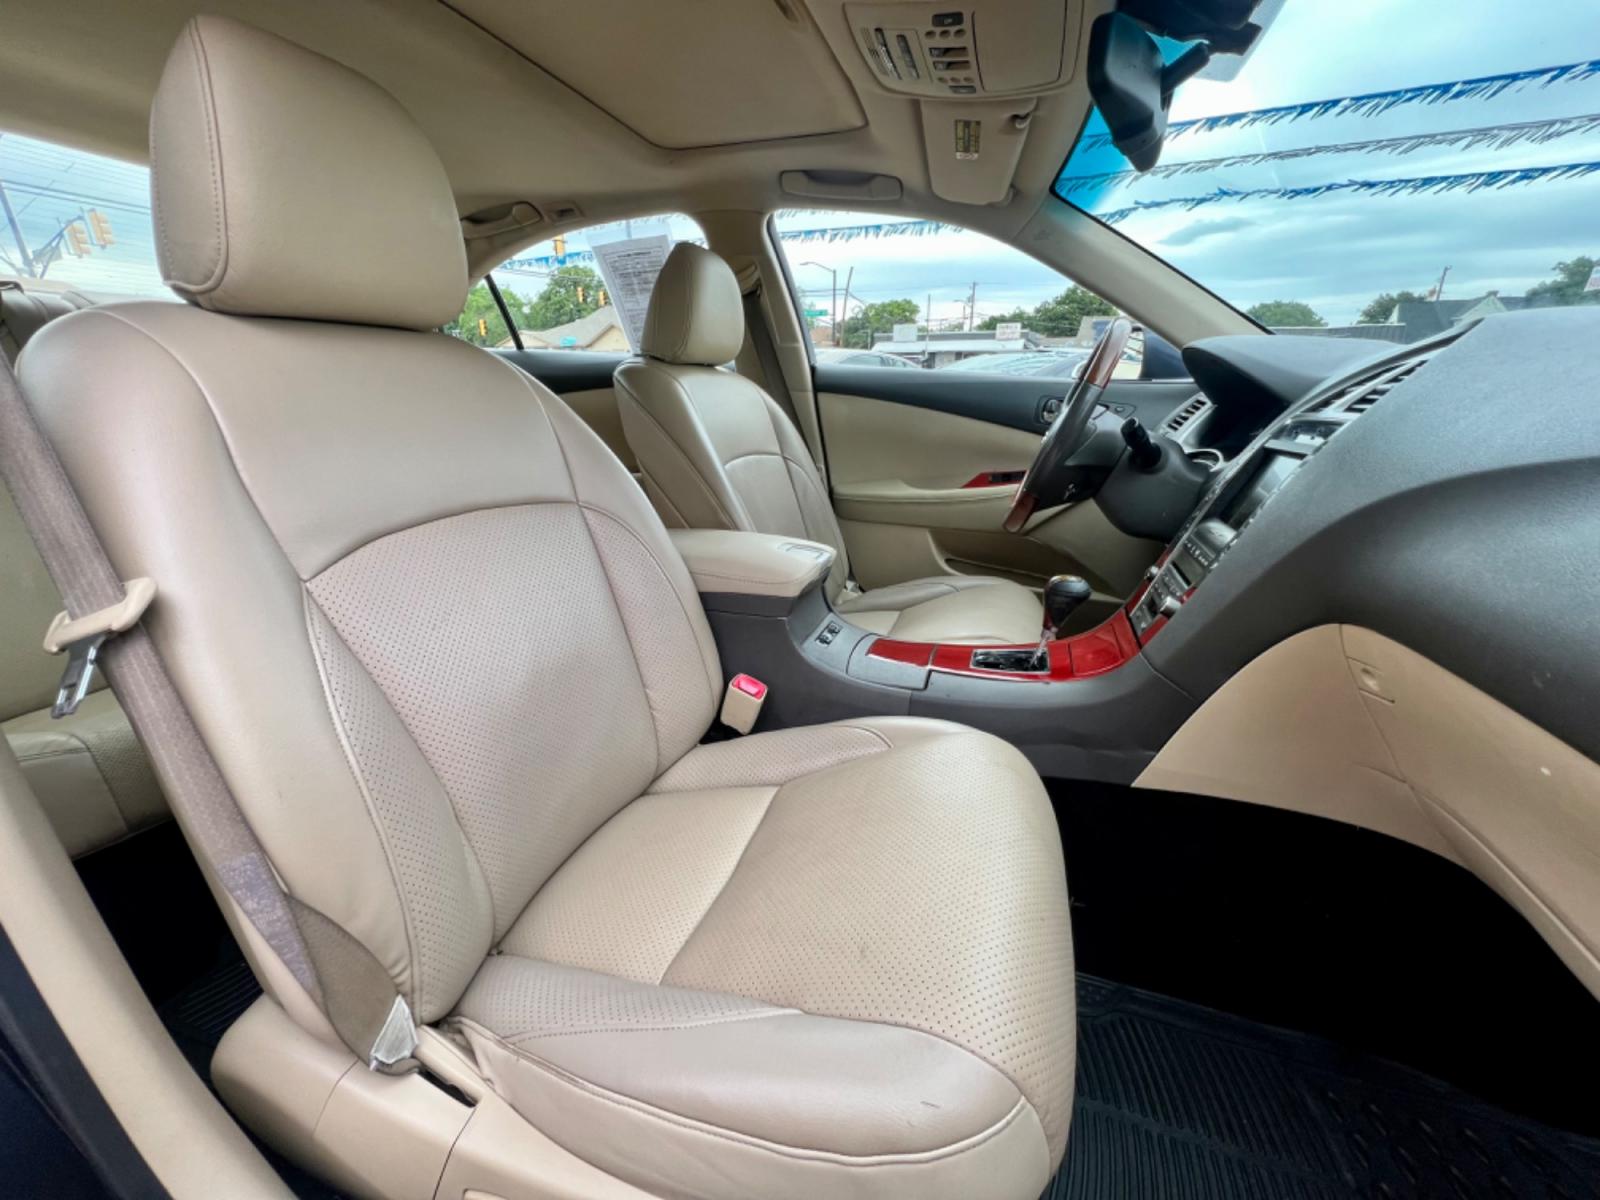 2008 BLUE LEXUS ES 350 (JTHBJ46G682) , located at 5900 E. Lancaster Ave., Fort Worth, TX, 76112, (817) 457-5456, 0.000000, 0.000000 - This is a 2008 LEXUS ES350 LUXURY 4 DR SEDAN that is in excellent condition. The interior is clean with no rips or tears or stains. All power windows, door locks and seats. Ice cold AC for those hot Texas summer days. It is equipped with a CD player, AM/FM radio. It runs and drives like new. The tir - Photo #13